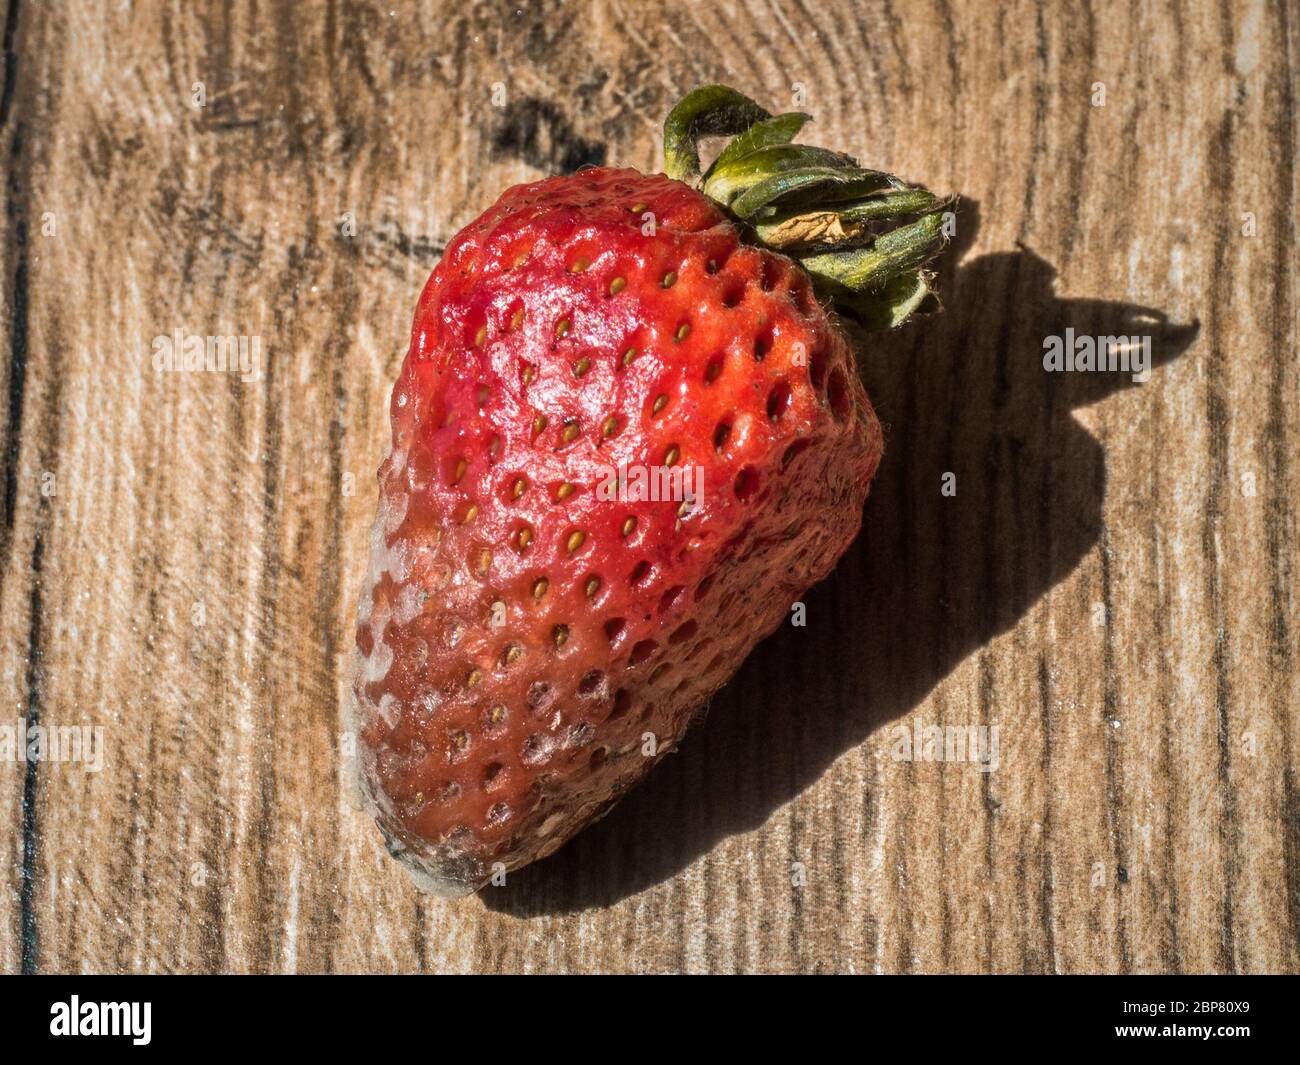 Rotten Strawberries Stock Photo - Download Image Now - Fungal Mold, Strawberry,  Mold - Flintshire - iStock